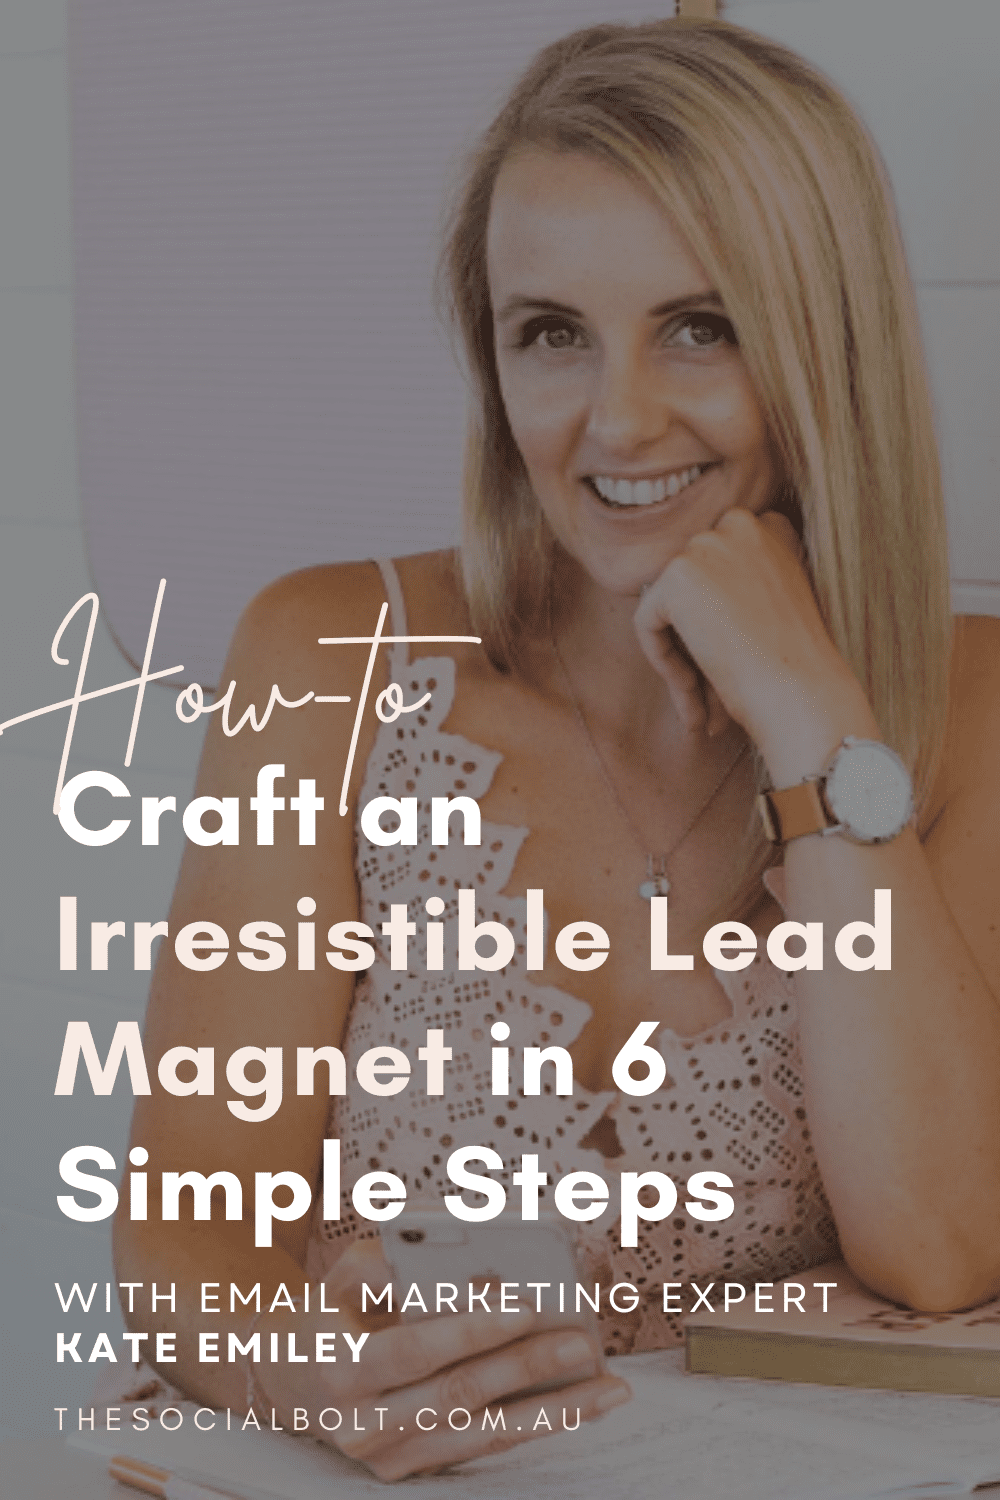 How to Create a Client-Attracting Lead Magnet with Kate Emiley